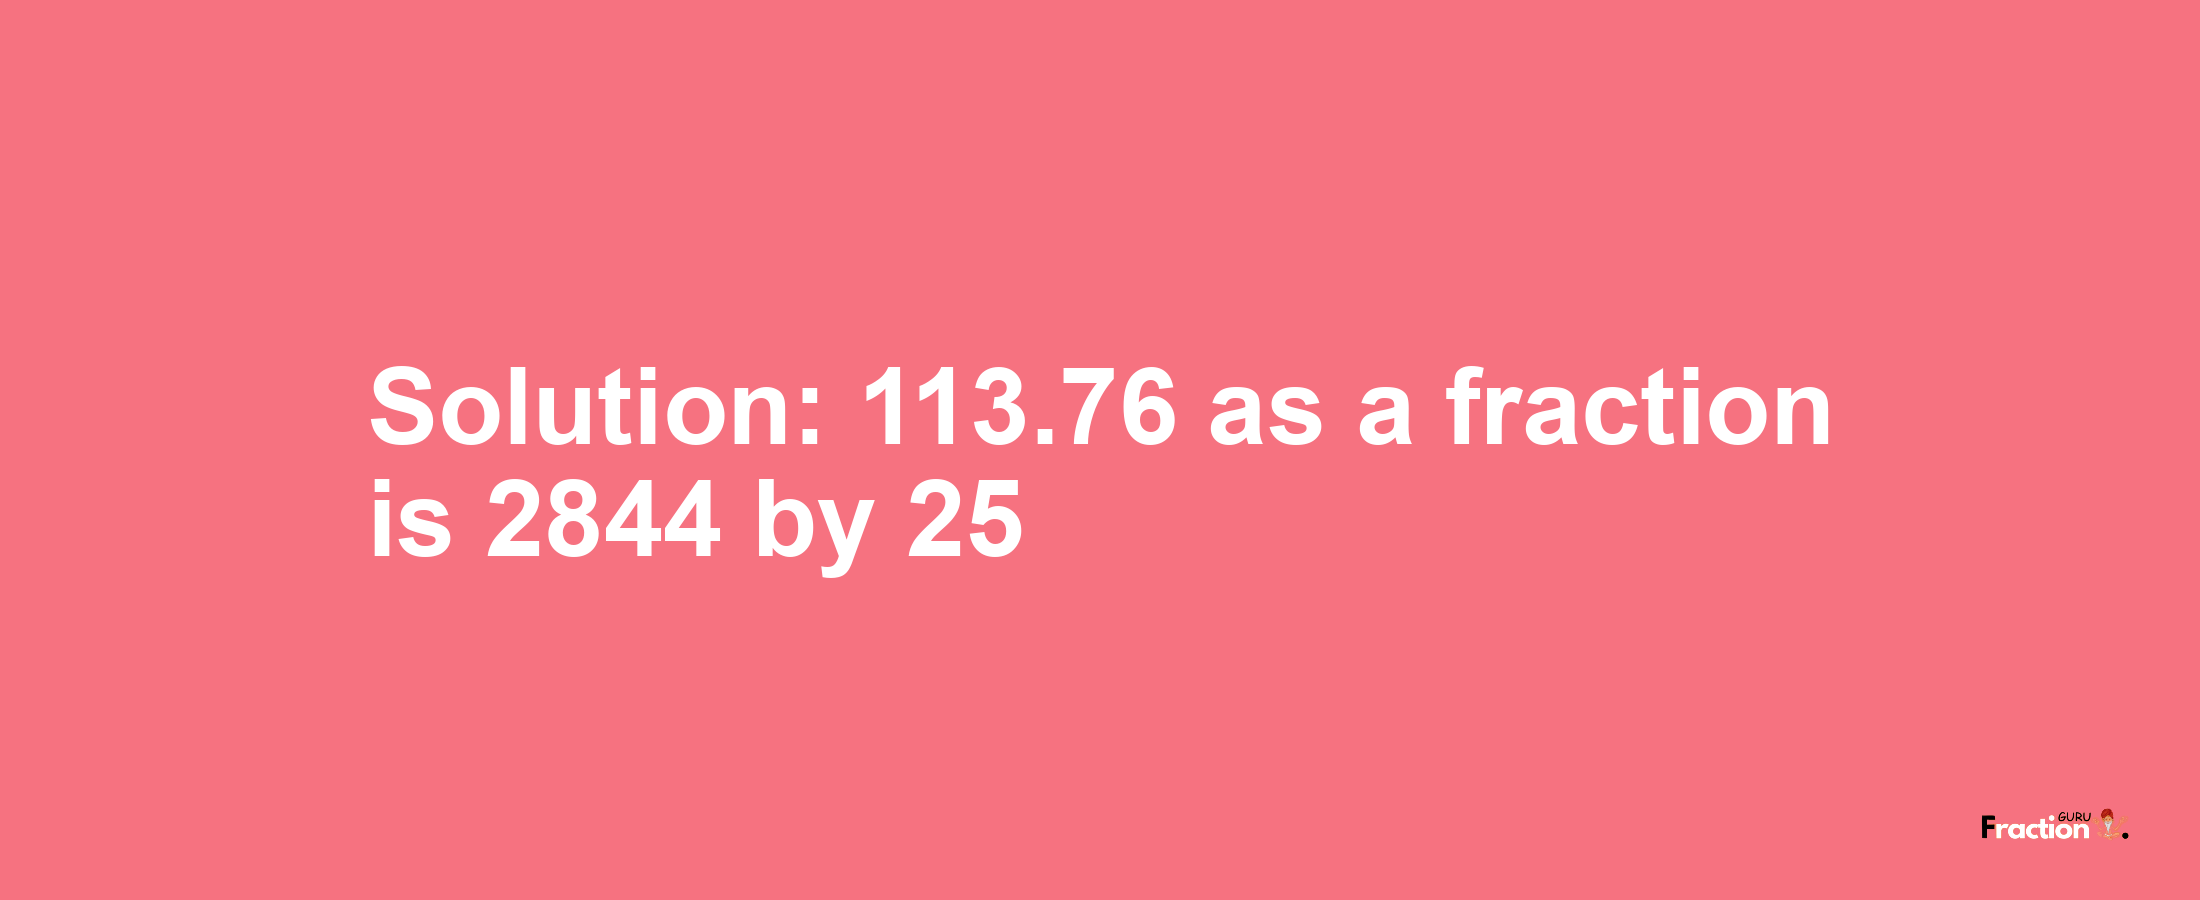 Solution:113.76 as a fraction is 2844/25